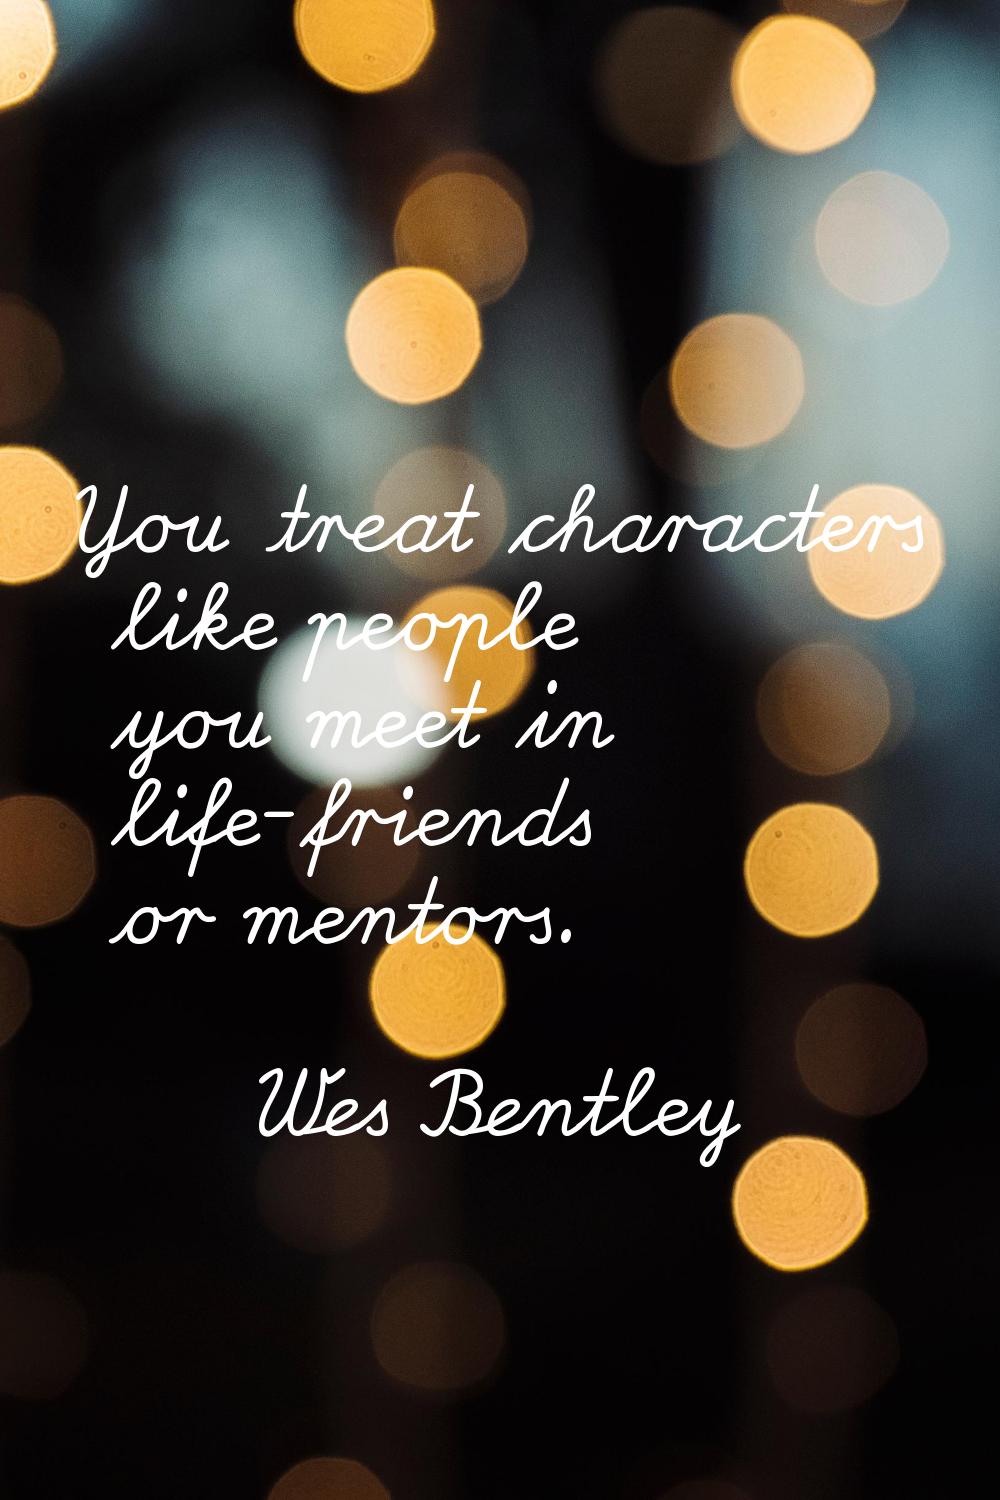 You treat characters like people you meet in life-friends or mentors.